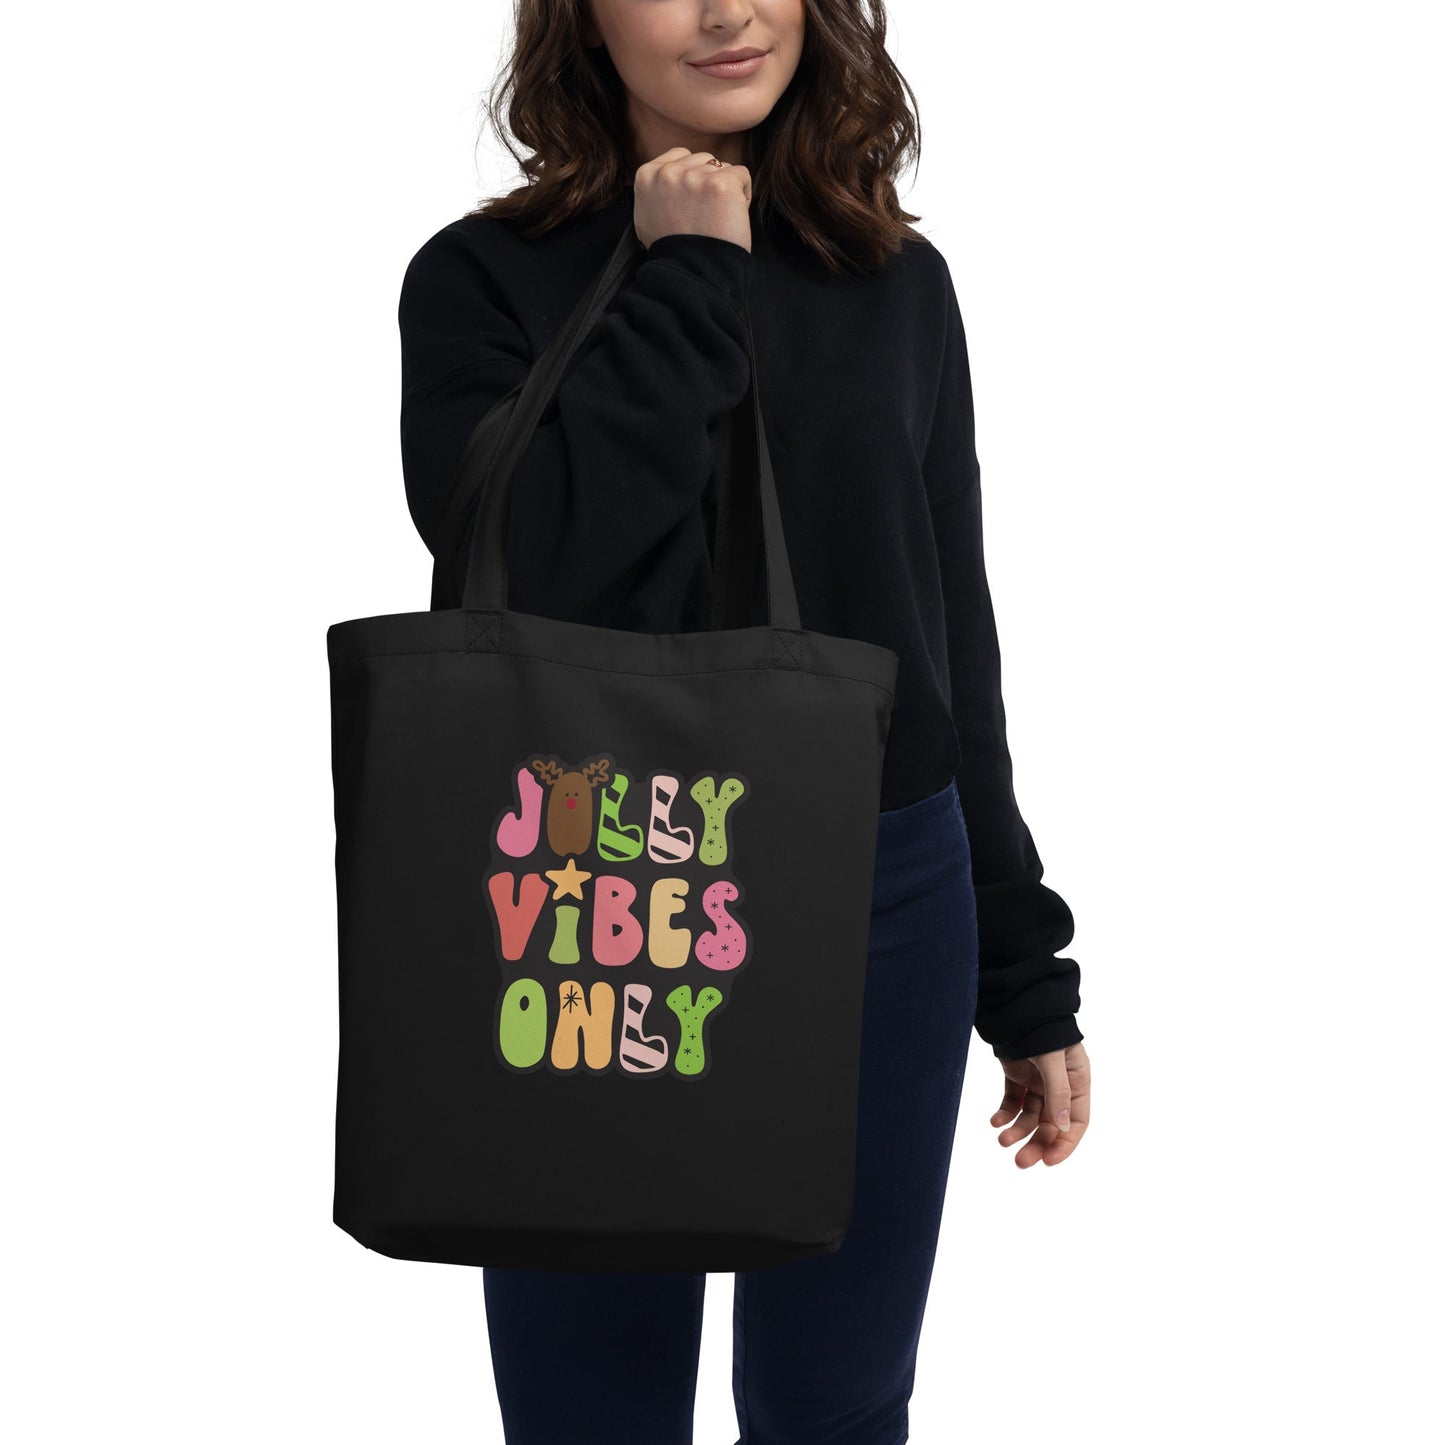 Jolly Vibes Only Christmas Eco Tote Bag Salmon Olive Black 